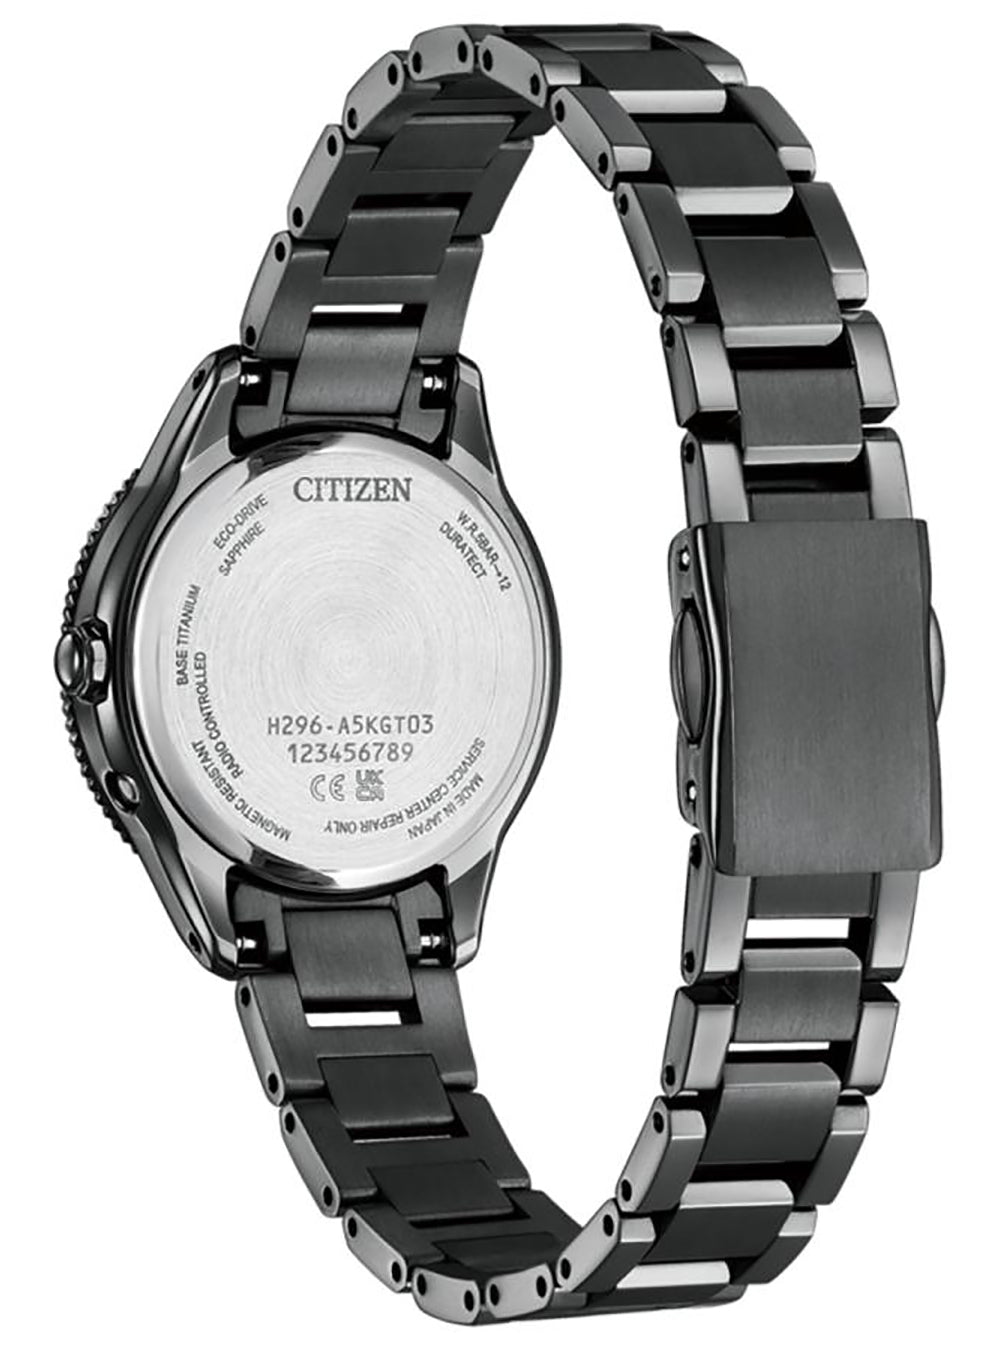 CITIZEN XC DAICHI COLLECTION DENPA LIMITED PAIR MODELS YOZORA COLLECTION  EE1007-75L LADIES MADE IN JAPAN JDM